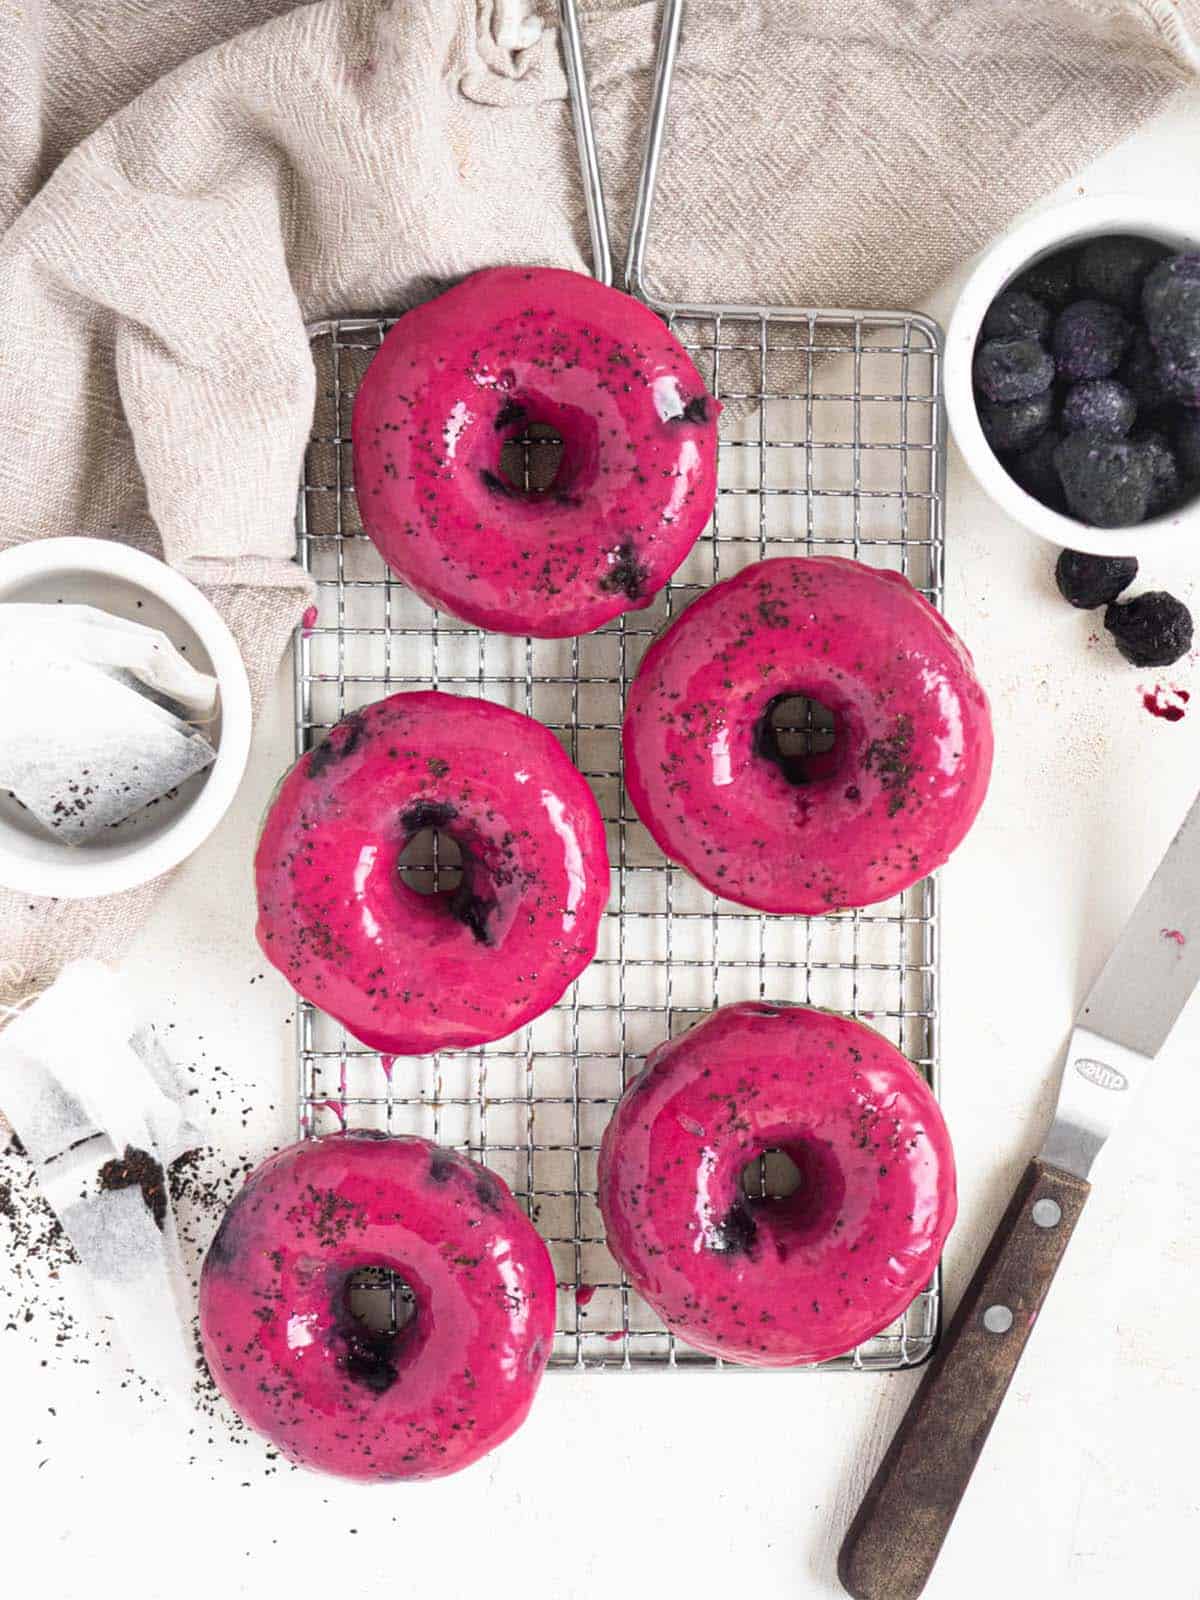 Soft cake donuts topped with a tangy lemon and blueberry glaze